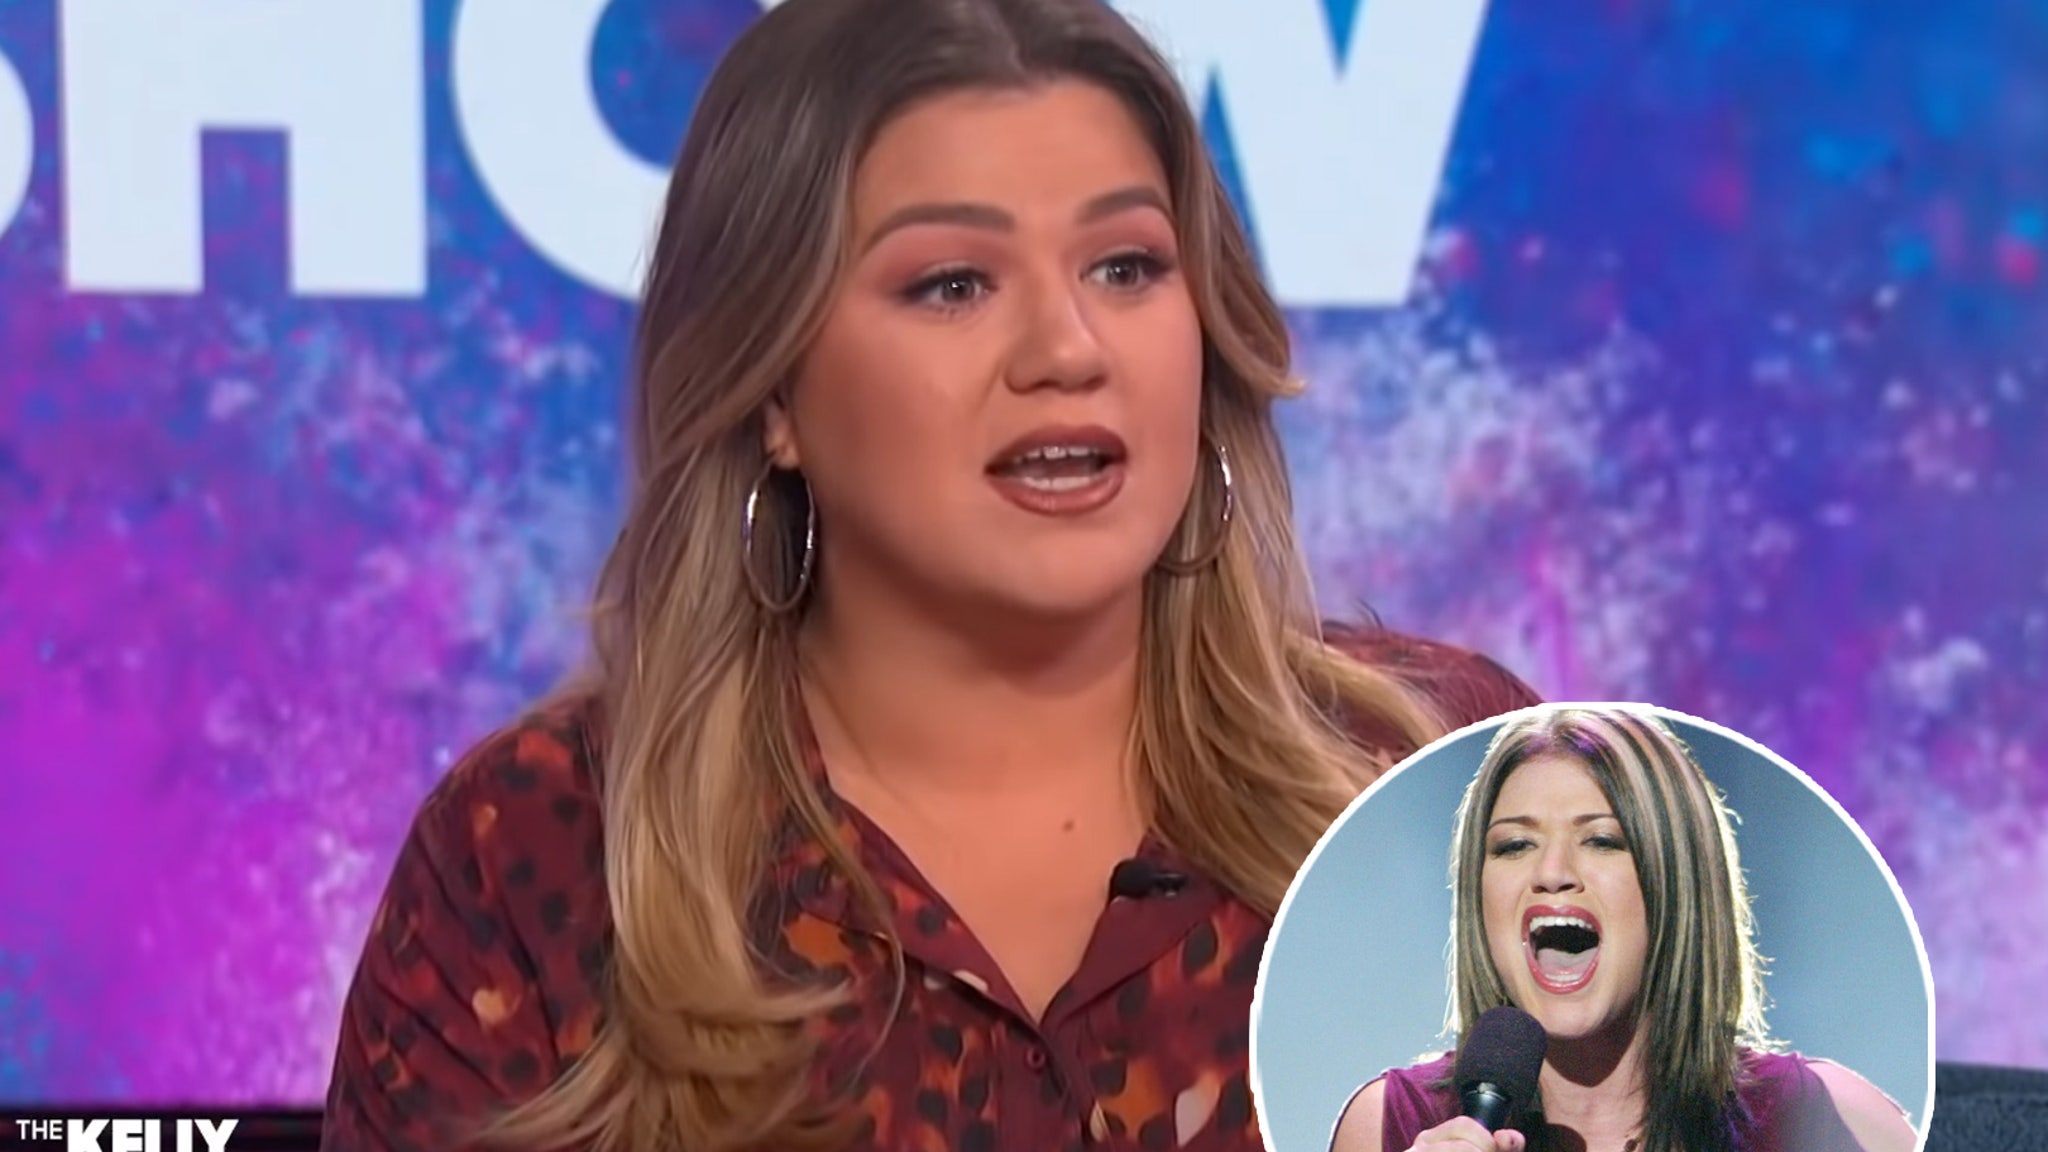 Kelly Clarkson reveals celebrities who were ‘mean’ and ‘rude’ during her American Idol days